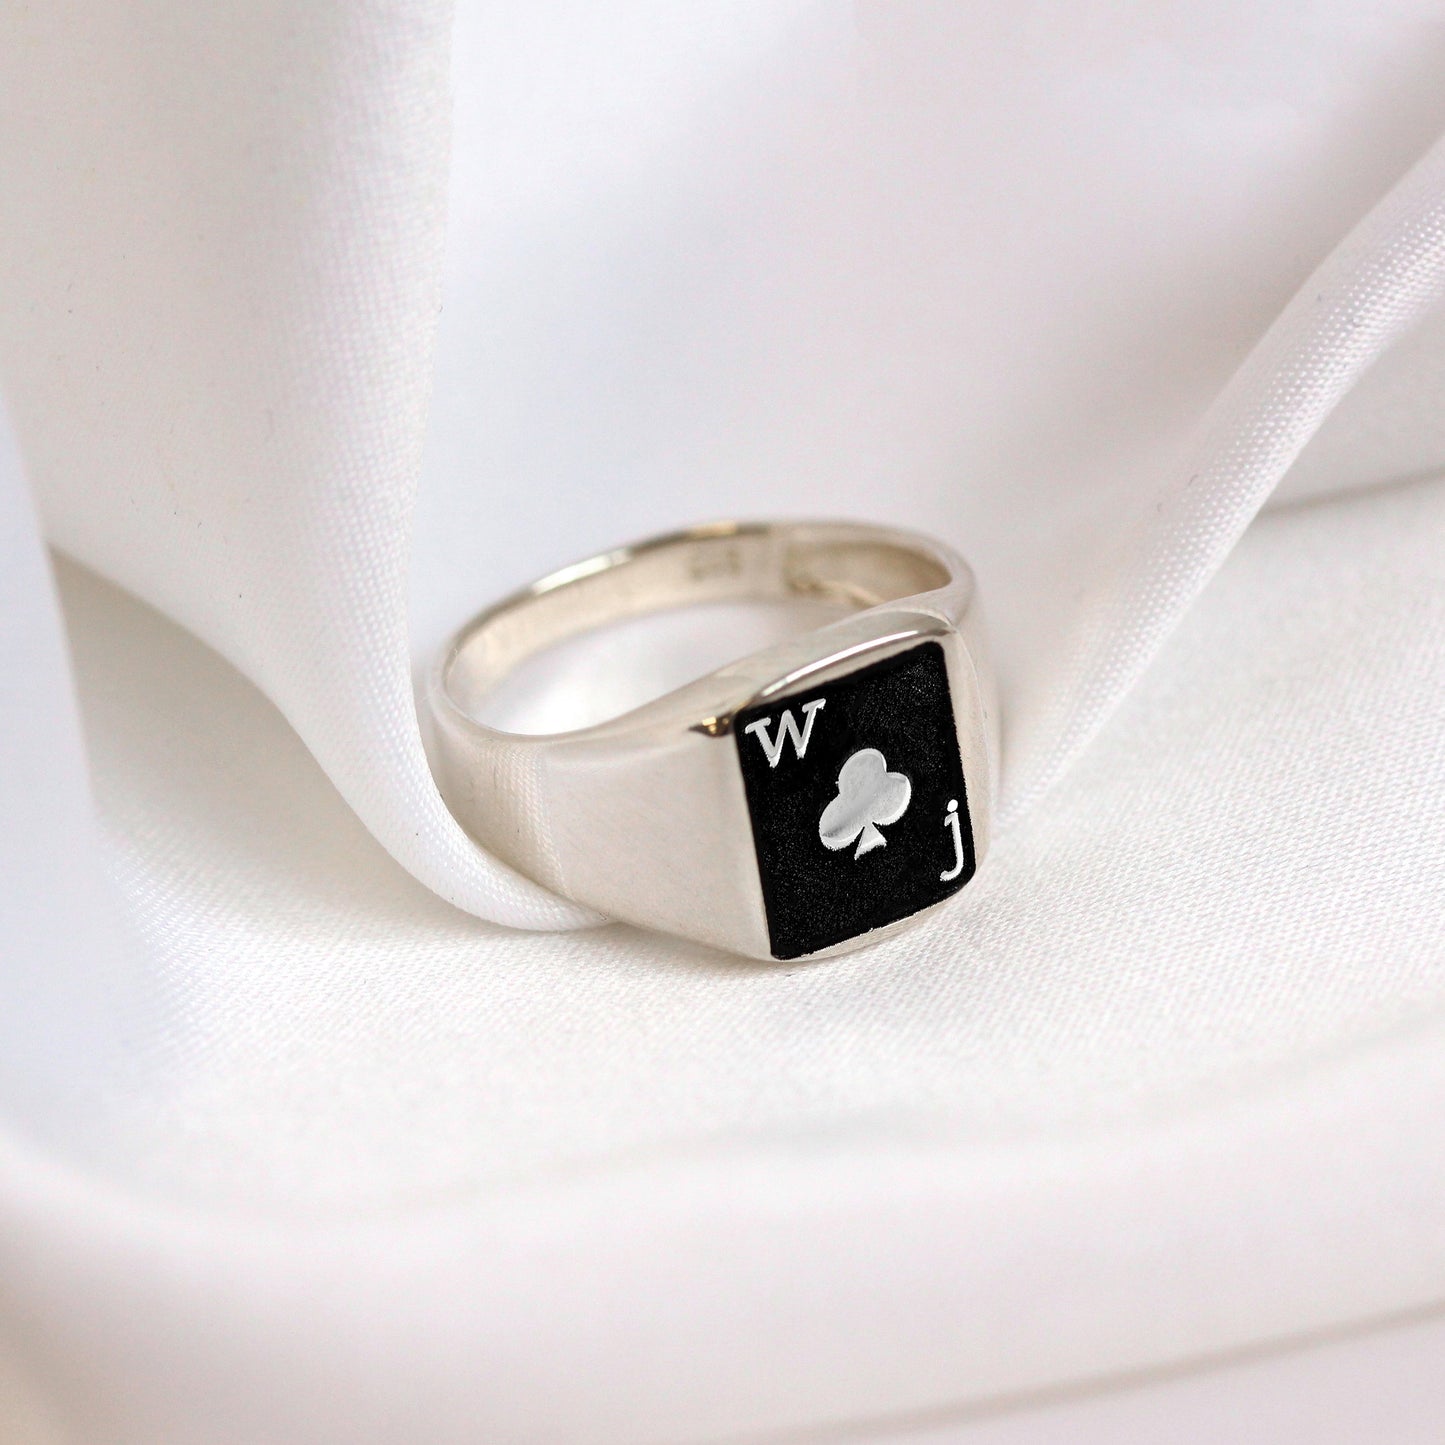 Bespoke Sterling Silver Clubs Playing Card Signet Ring